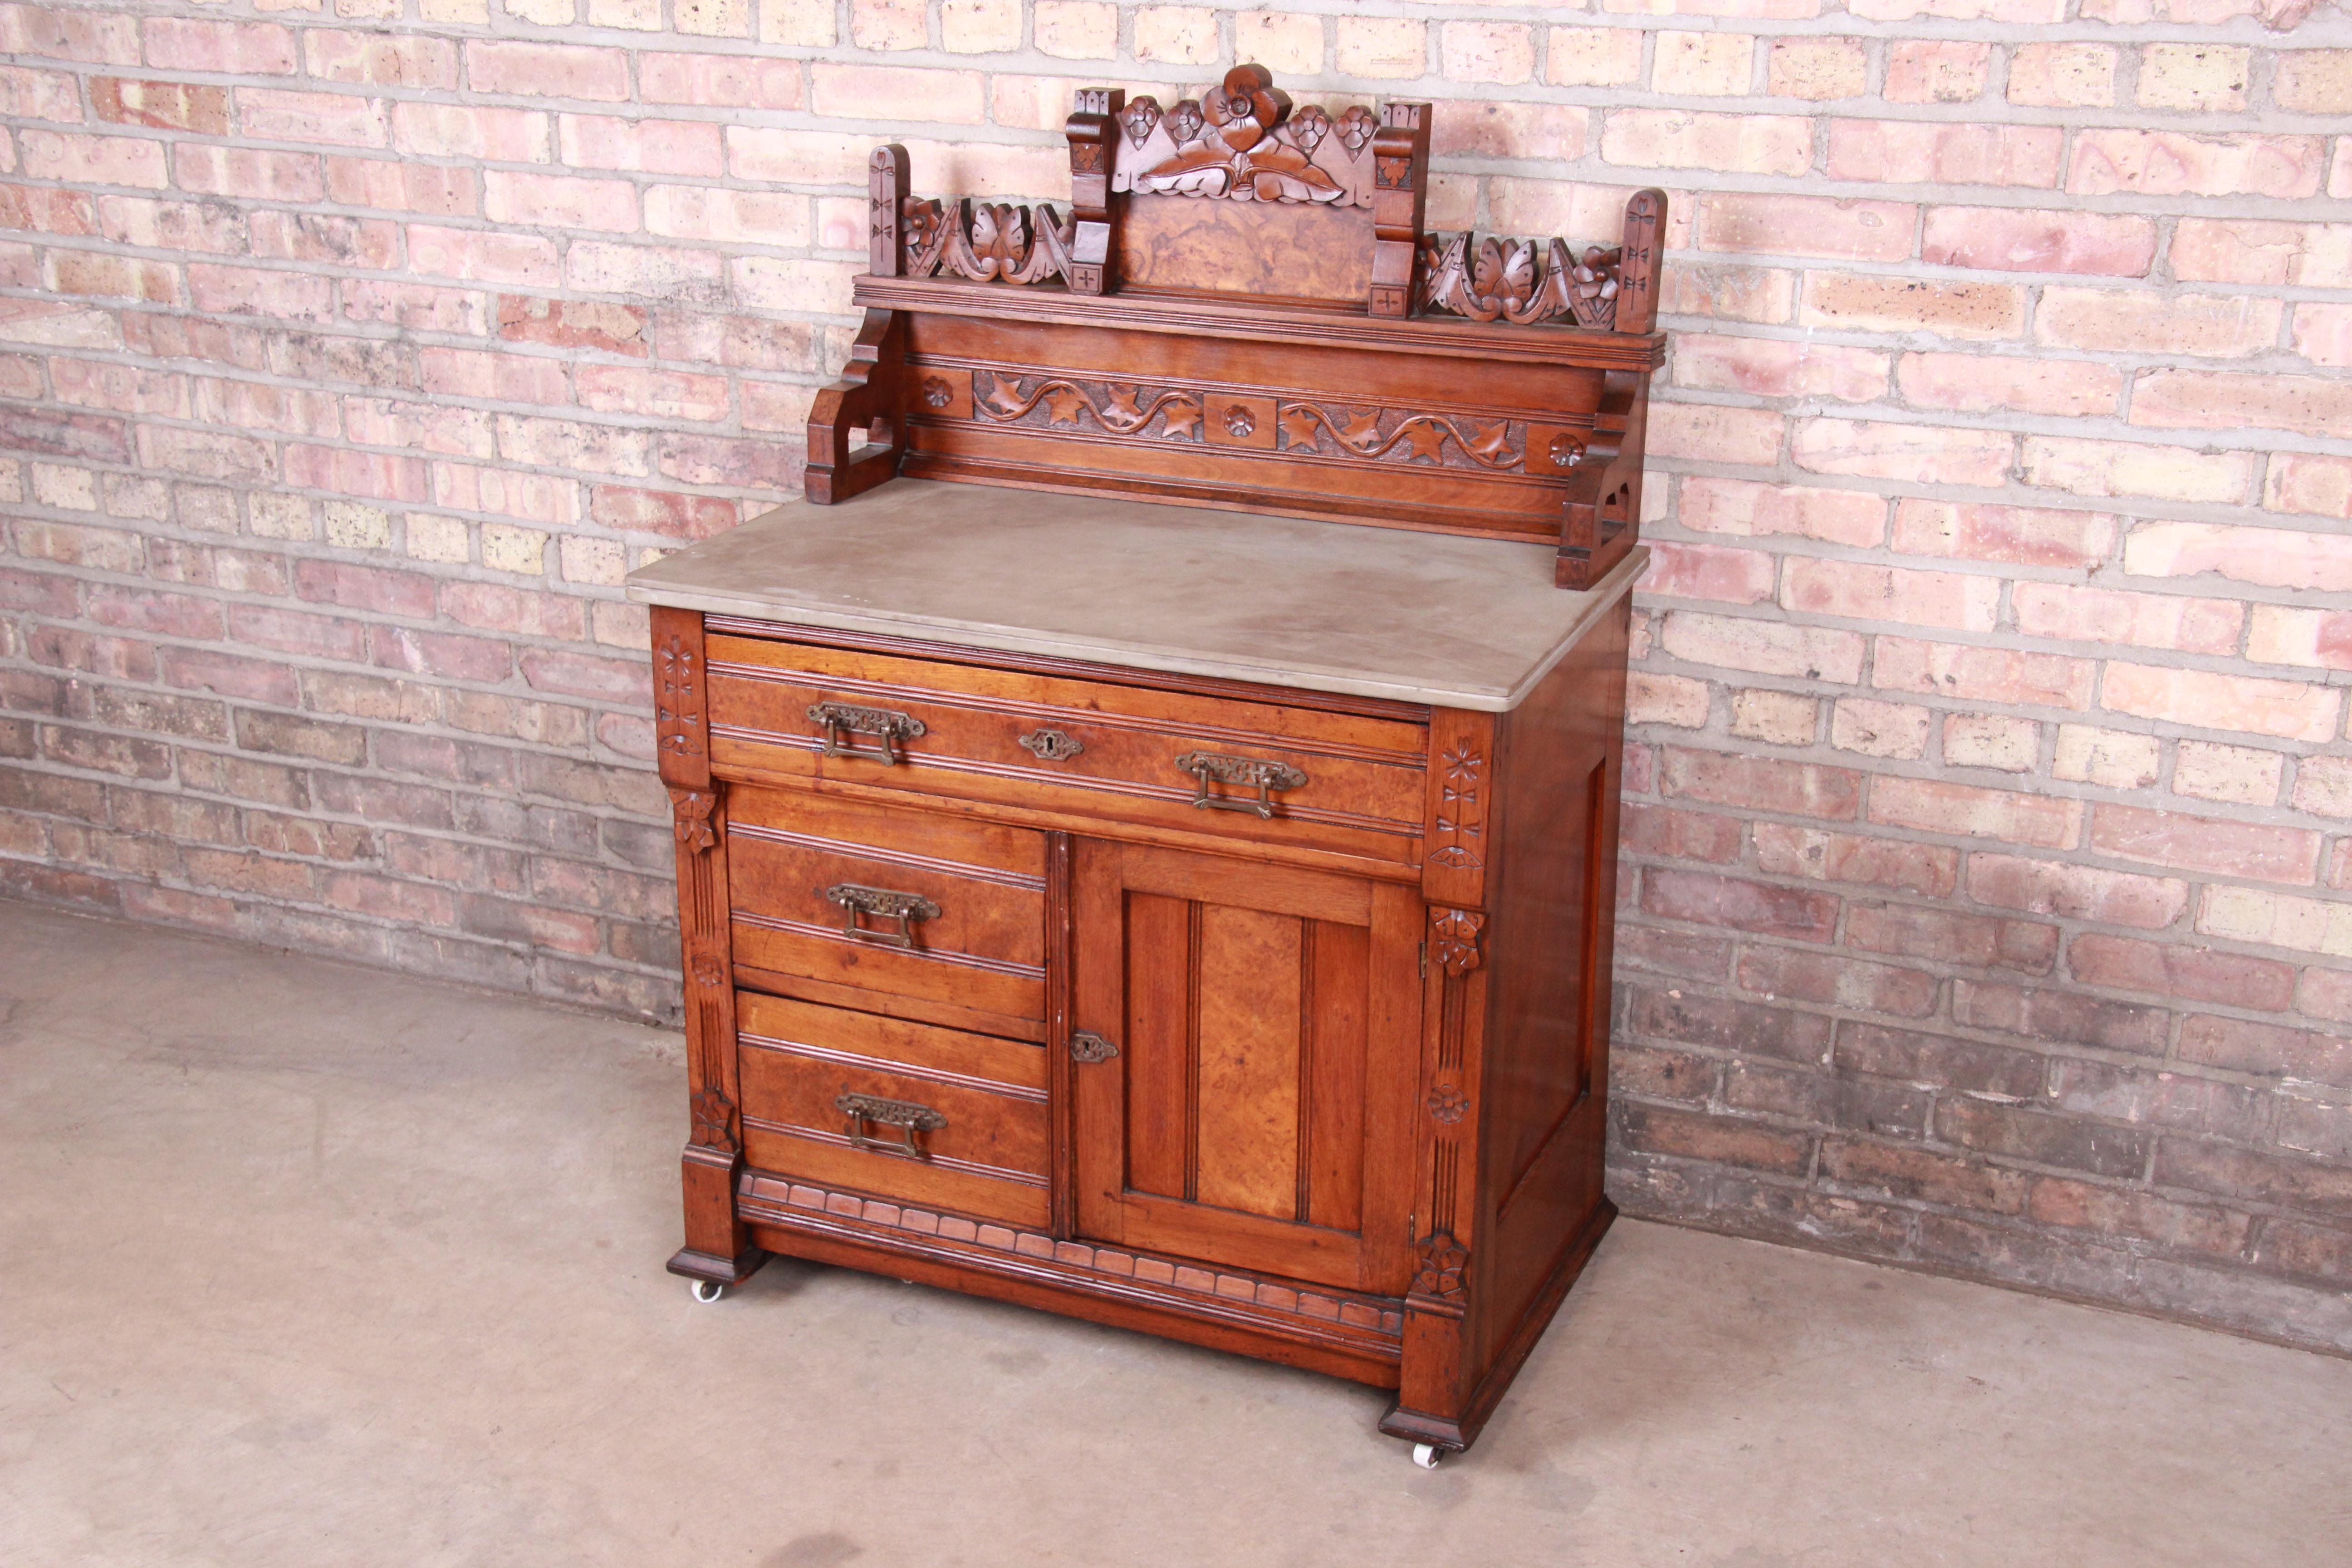 An outstanding Victorian Eastlake washstand

Originally purchased from Marshall Field's in Chicago, circa 1870

Ornate carved walnut and burl wood in floral motif, with original brass hardware, slate top, and porcelain casters.

Measures: